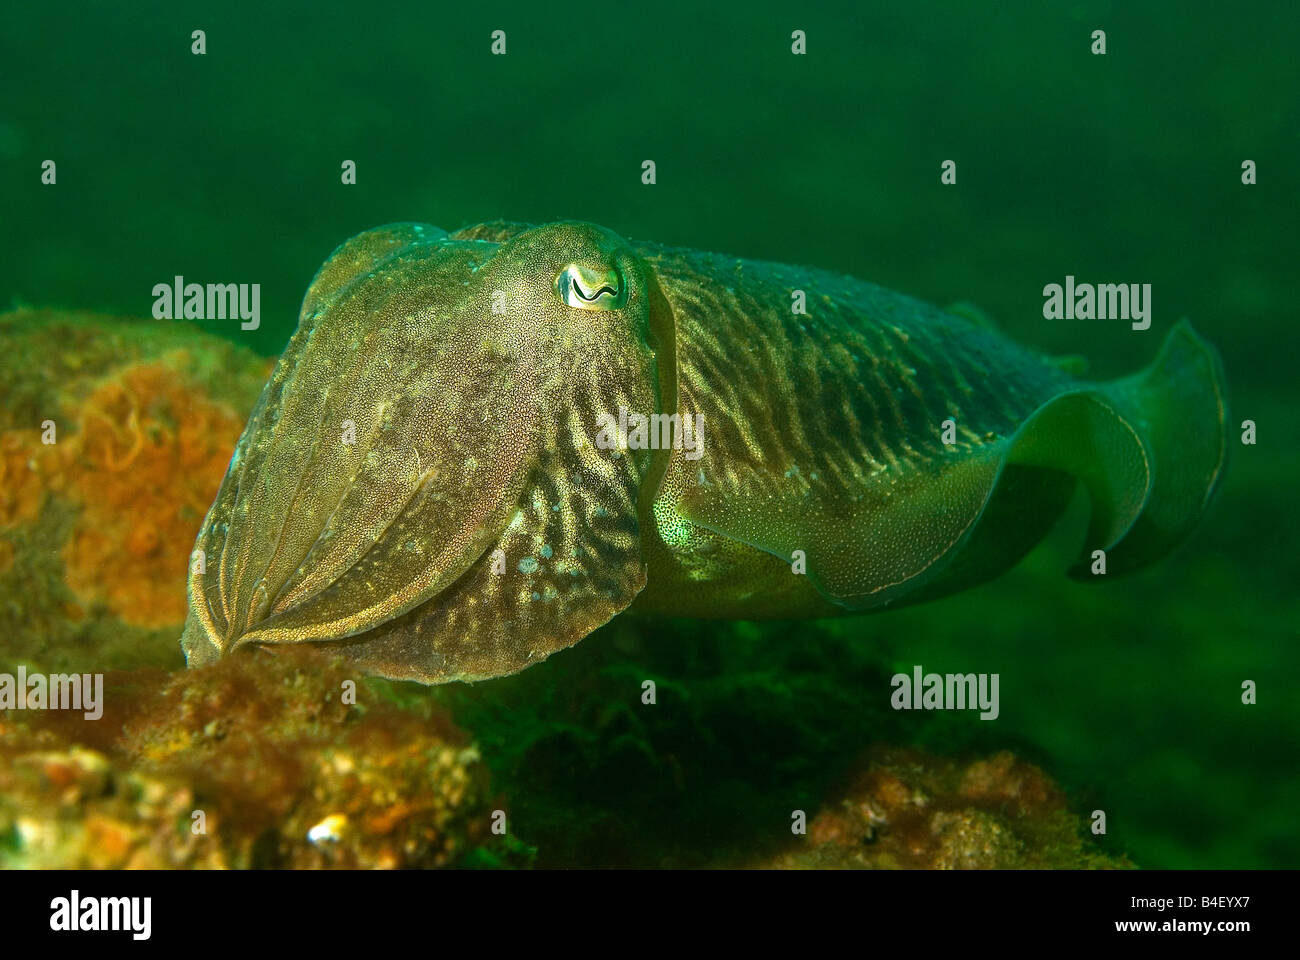 cuttle fish on the adelaide Stock Photo